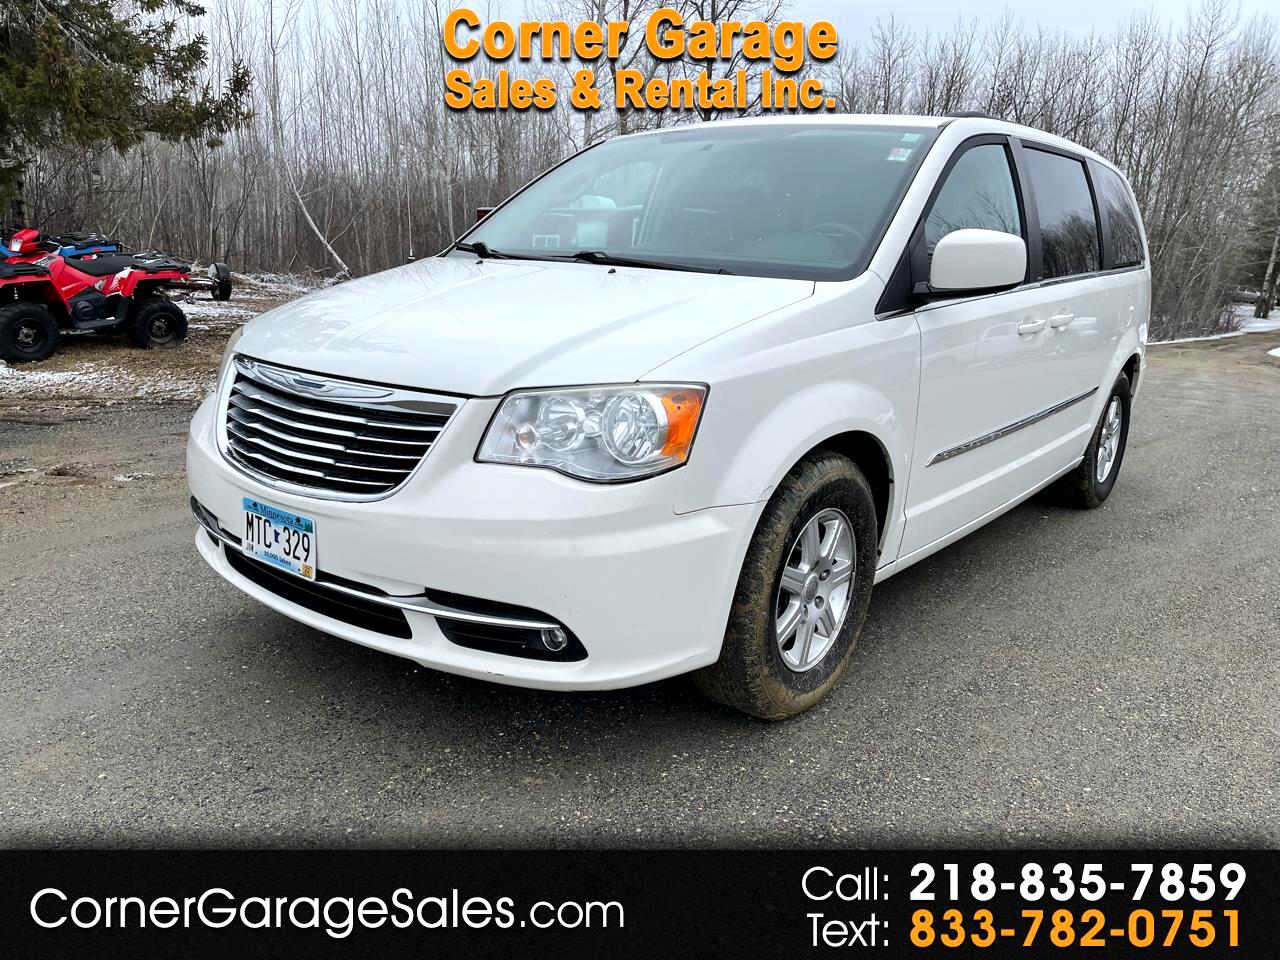 2012 Chrysler Town & Country 3dr Wgn 113" WB LX FWD